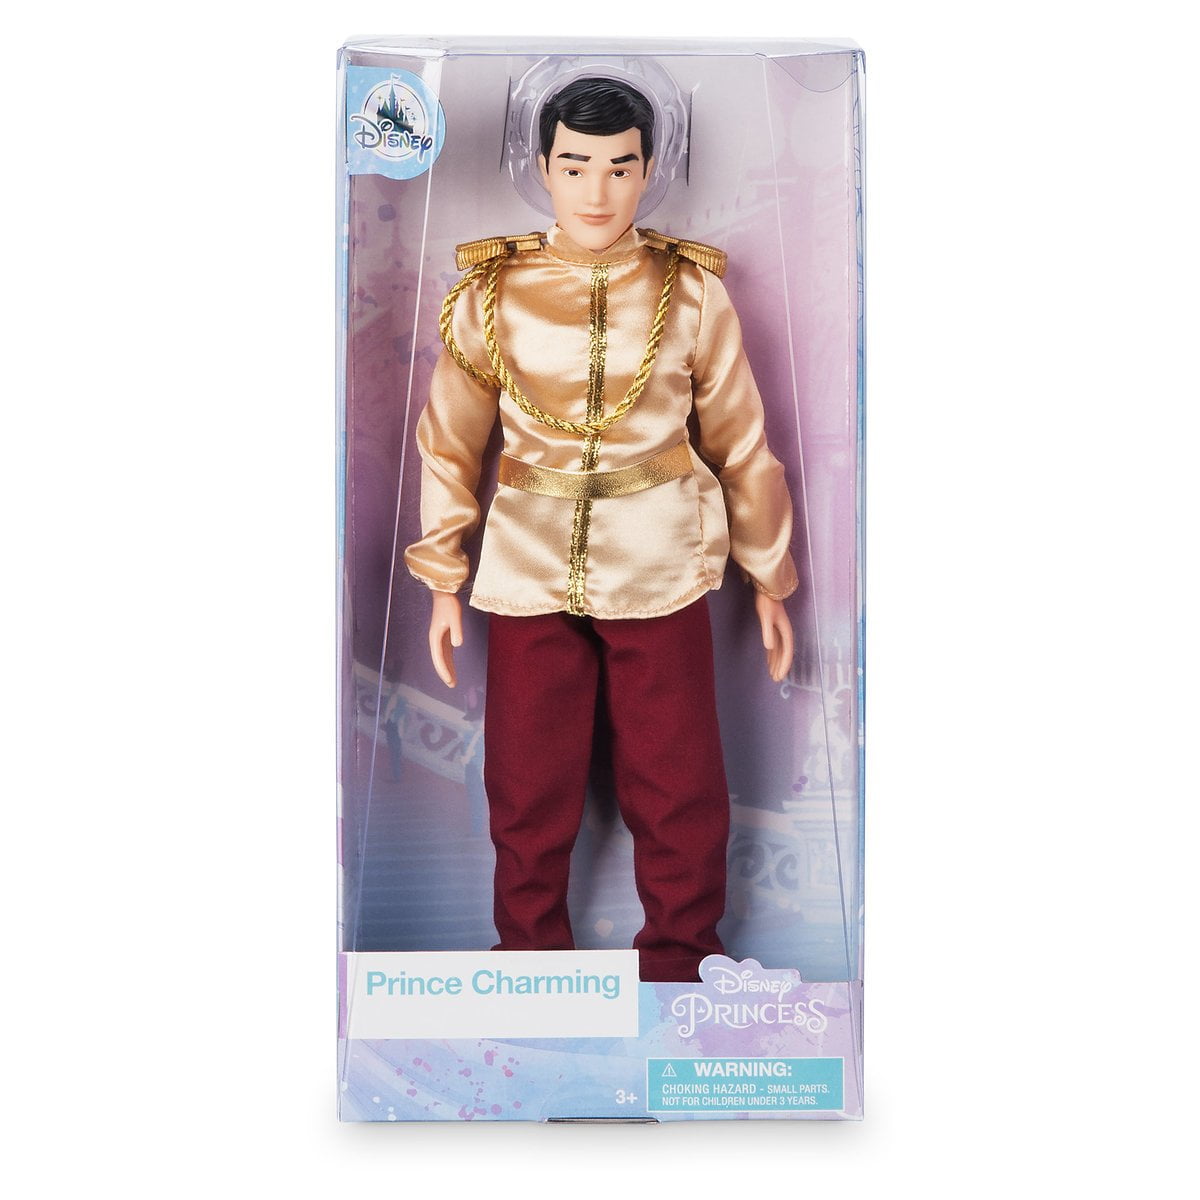 Disney Princess Classic Doll Prince Charming from